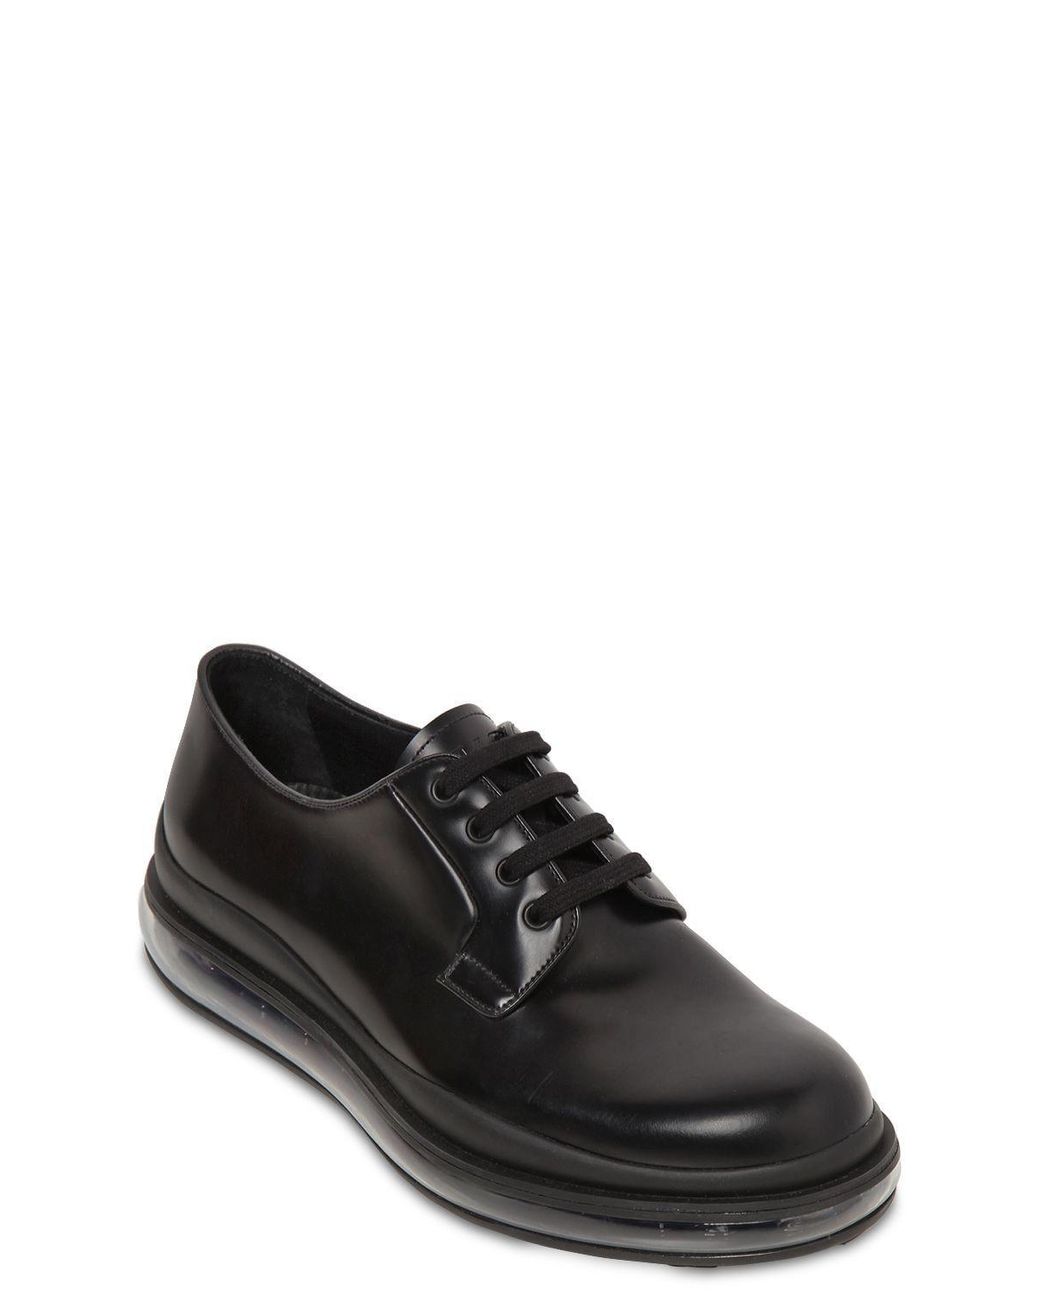 Prada Levitate Brushed Leather Derby Shoes in Nero (Black) for Men - Save  5% | Lyst